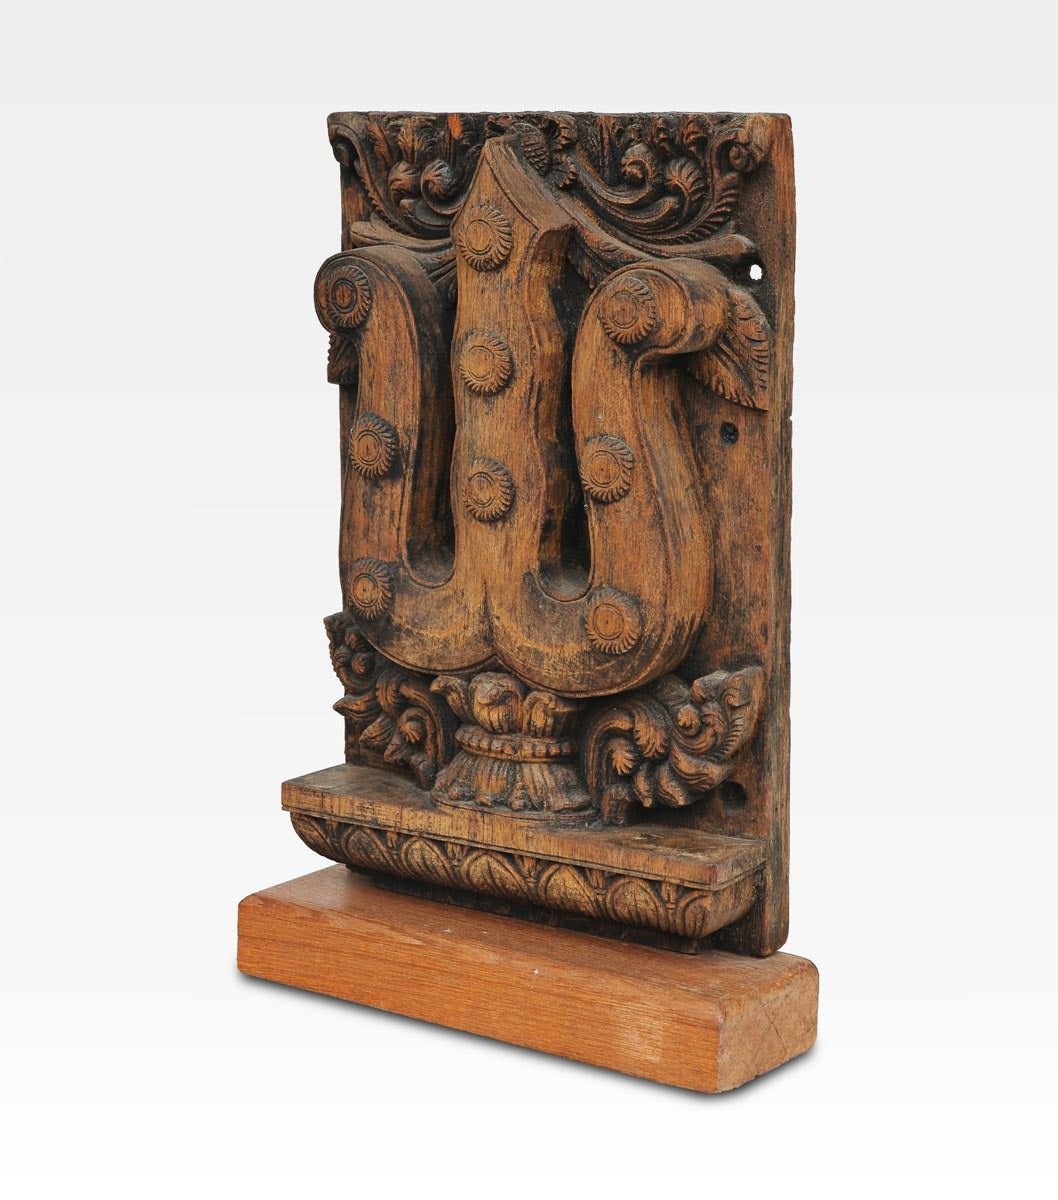 Beautiful Indian panel made of precious teakwood and dating from the 18th century. It was originally used during ceremonies. The quality of the material joins the deep symbolic meaning. The frieze depicts the trident of Shiva, which depicted